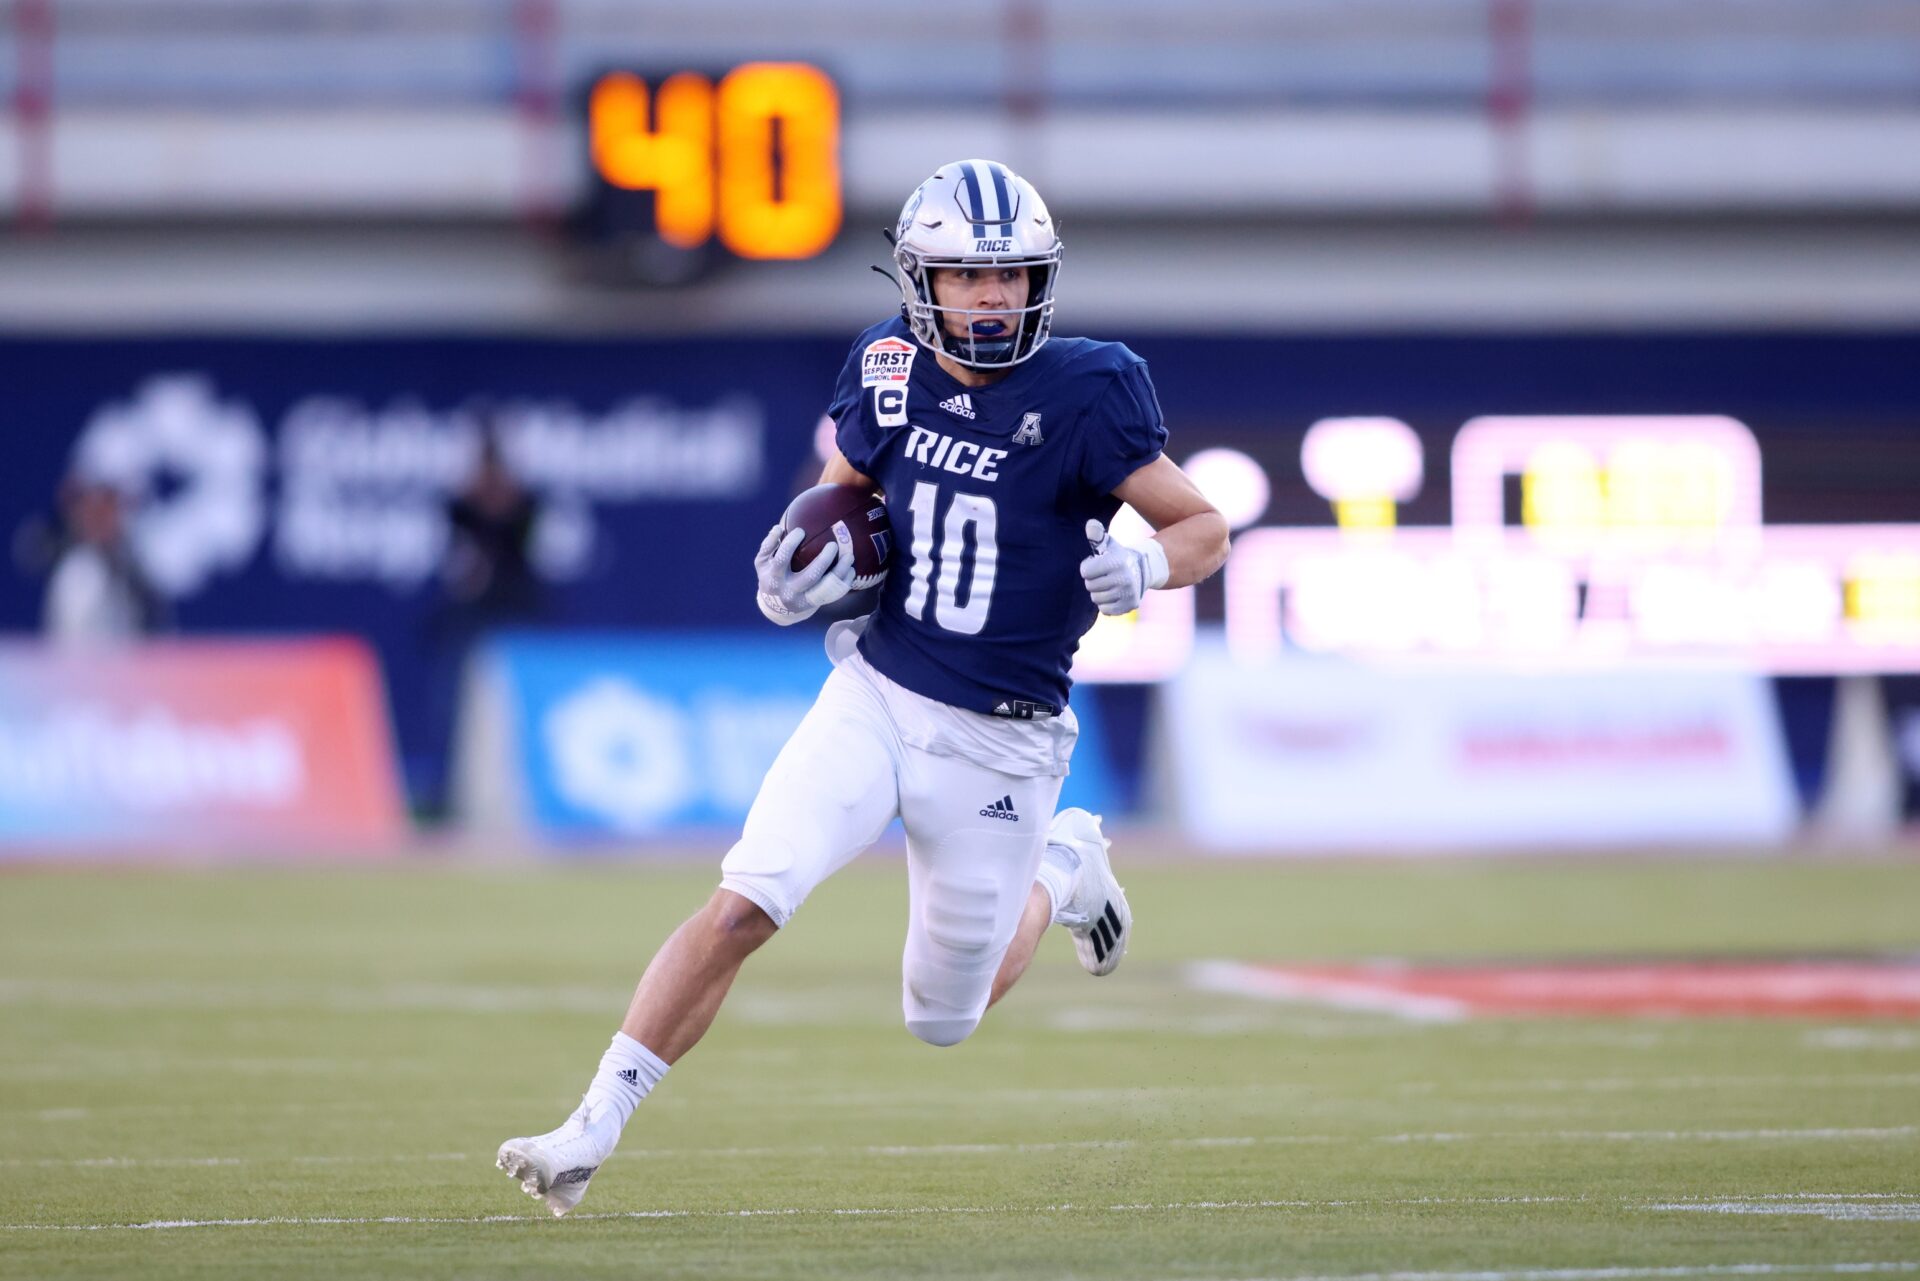 Rice Owls wide receiver Luke McCaffrey (10) runs with the ball against the Texas State Bobcats in the first quarter at Gerald J Ford Stadium. Mandatory Credit: Tim Heitman-USA TODAY Sports